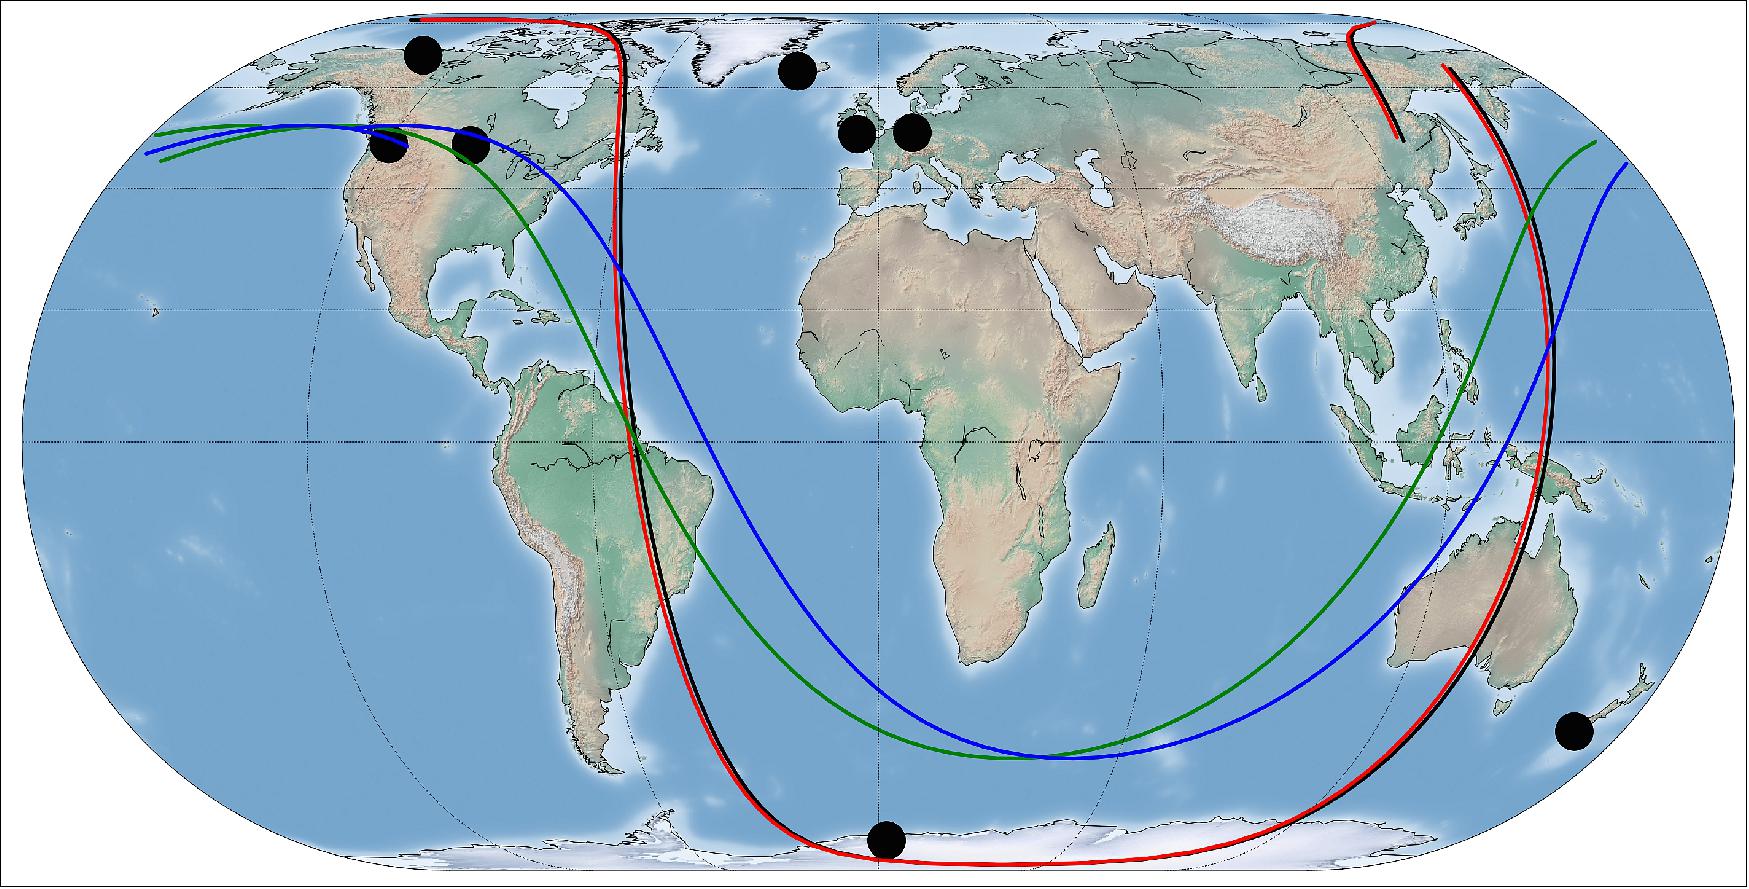 Figure 61: Location of X-band ground station antennas (black circles) and ground tracks of representative Dove satellites per flock (Flock 2P = Black, Flock 3P = Red, Flock 2E = Blue, Green), image credit: Planet Labs (Ref. 6)